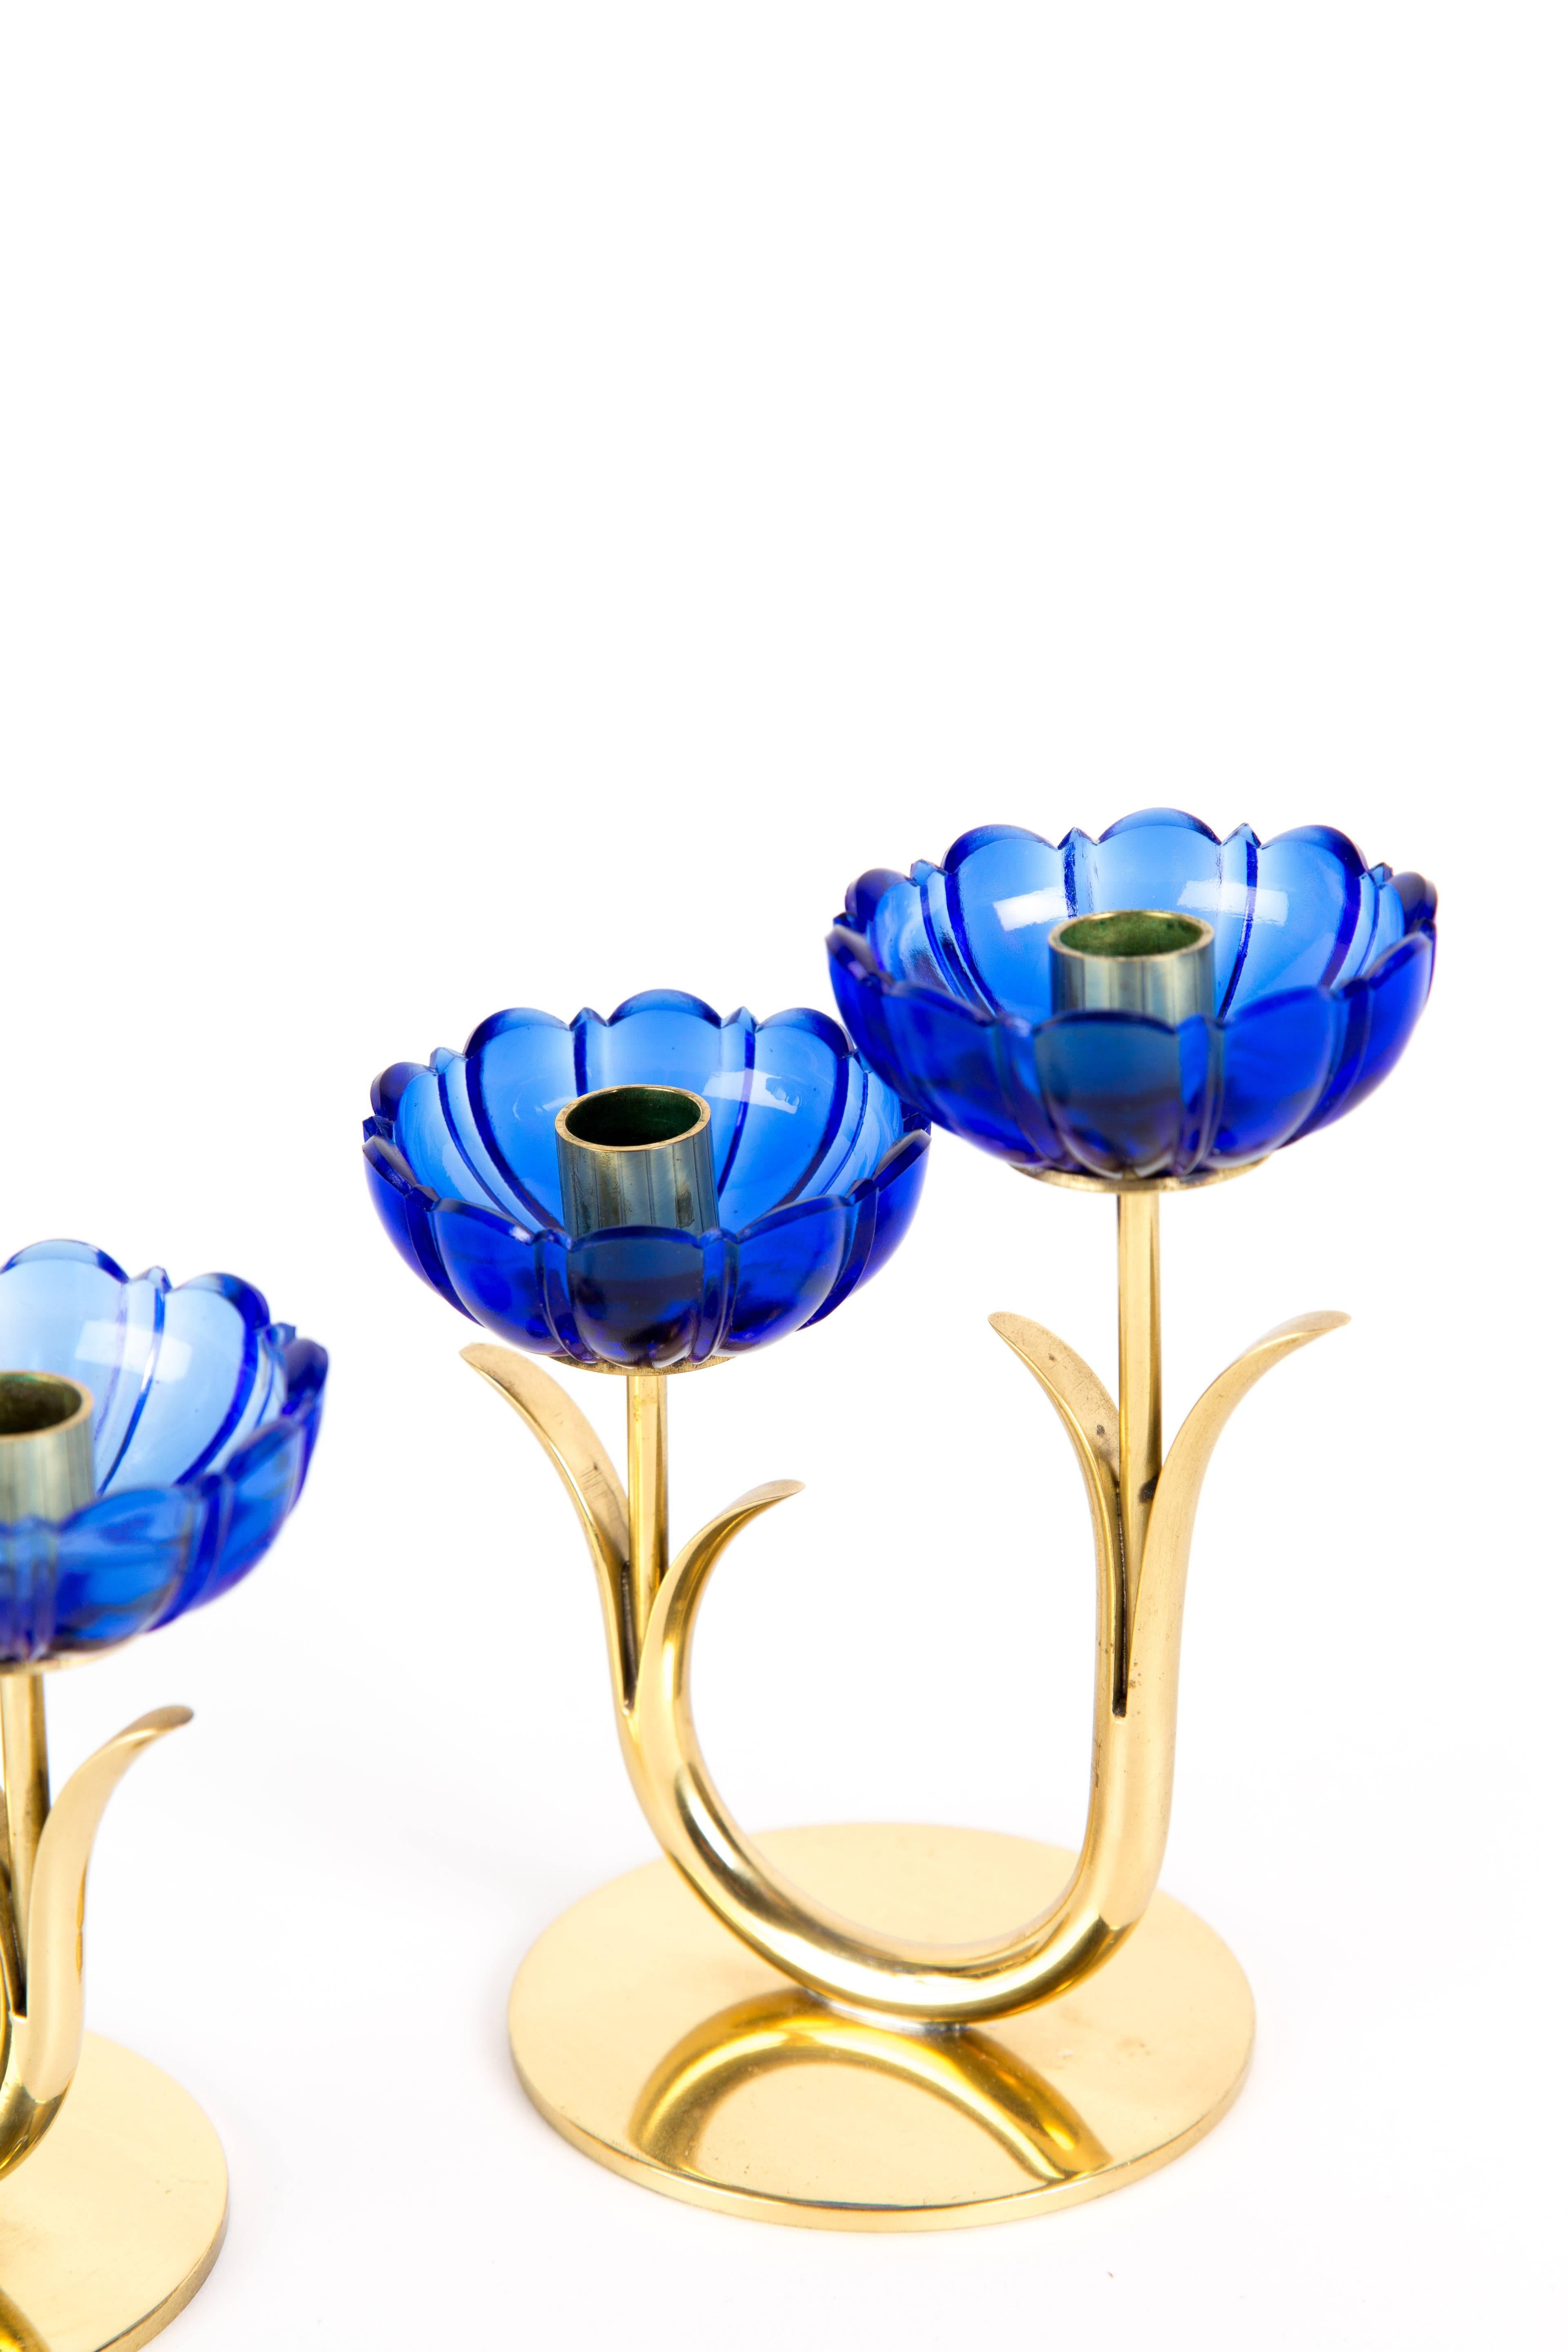 GUNNAR ANDER CANDLEHOLDERS. A set of two candleholders with blue transparent art glass. One double and one solo. Designed by Gunnar Ander for Swedish Ystad-Metal. The set is marked on the bottom. The price is for one set of flowers (three flowers).